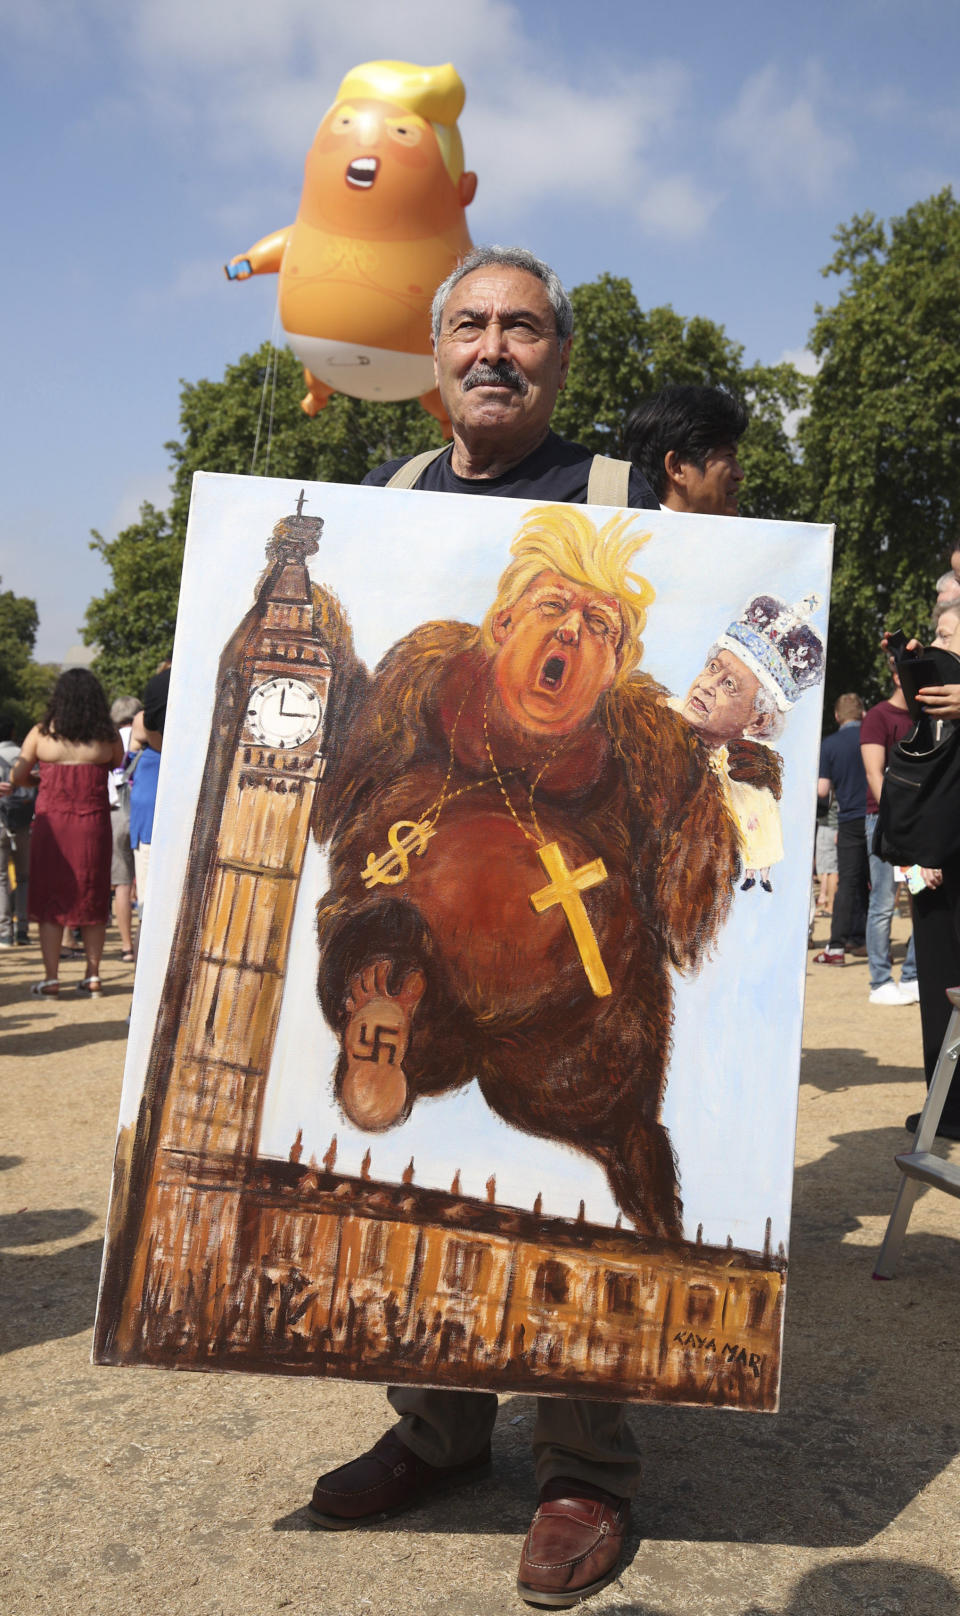 <p>Political artist Kaya Mar holds a painting depicting Donald Trump, during protests in London, July 13, 2018. Trump’s pomp-filled welcome to Britain was overshadowed Friday by an explosive interview in which he blasted Prime Minister Theresa May, blamed London’s mayor for terror attacks against the city and argued that Europe was “losing its culture” because of immigration. (Photo: Yui Mok/AP) </p>